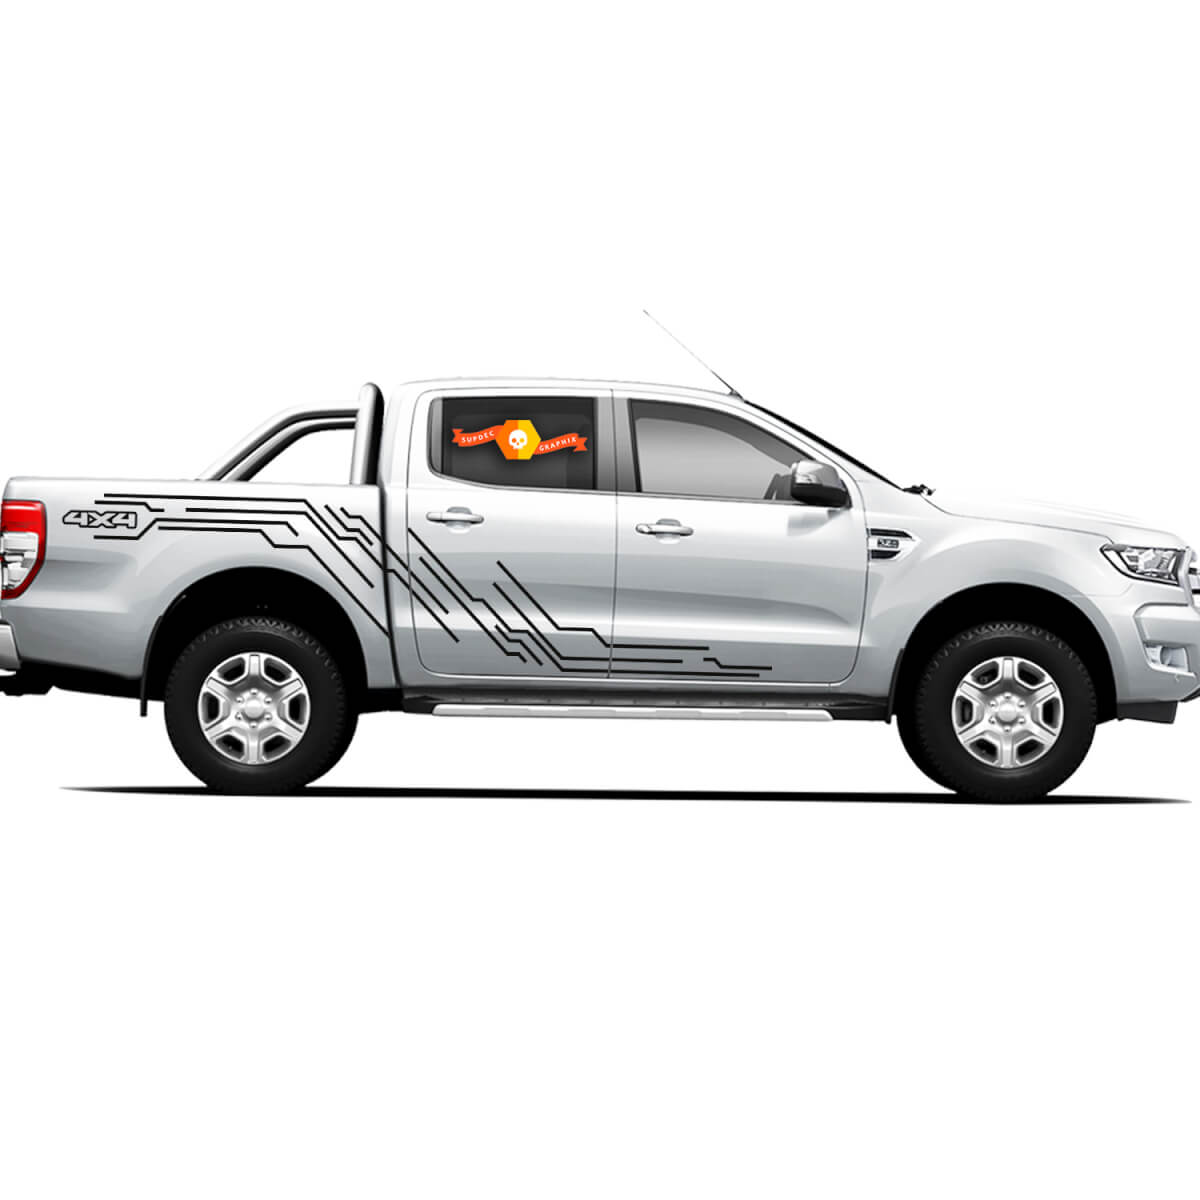  Pair Decals Vinyl Stickers 4X4 Tacoma Toyota TRD Off Road Truck side Doors Cyberpunk Lines